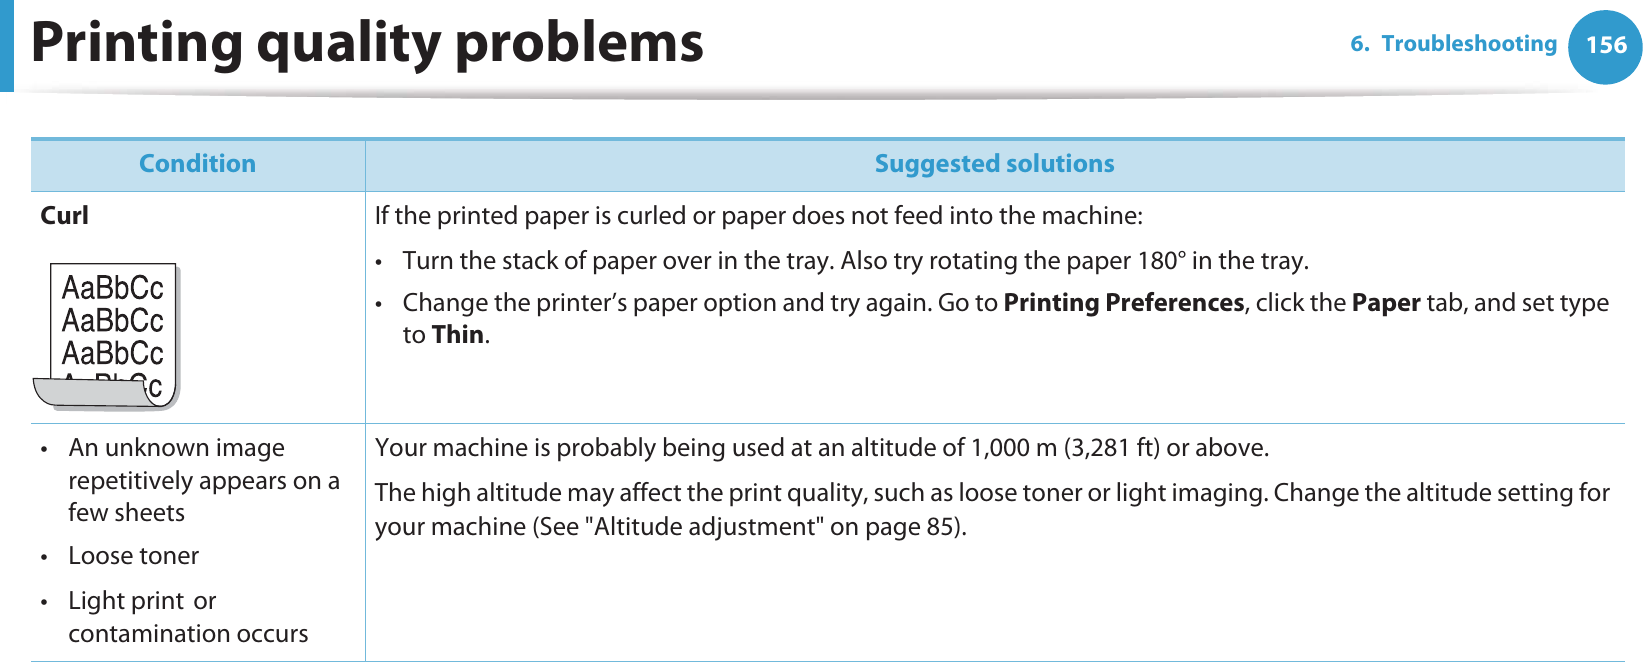 Printing quality problems 1566. Troubleshooting Curl If the printed paper is curled or paper does not feed into the machine:• Turn the stack of paper over in the tray. Also try rotating the paper 180° in the tray. • Change the printer’s paper option and try again. Go to Printing Preferences, click the Paper tab, and set type to Thin.• An unknown image repetitively appears on a few sheets•Loose toner•Light printGor contamination occursYour machine is probably being used at an altitude of 1,000 m (3,281 ft) or above.The high altitude may affect the print quality, such as loose toner or light imaging. Change the altitude setting for your machine (See &quot;Altitude adjustment&quot; on page 85).Condition Suggested solutions